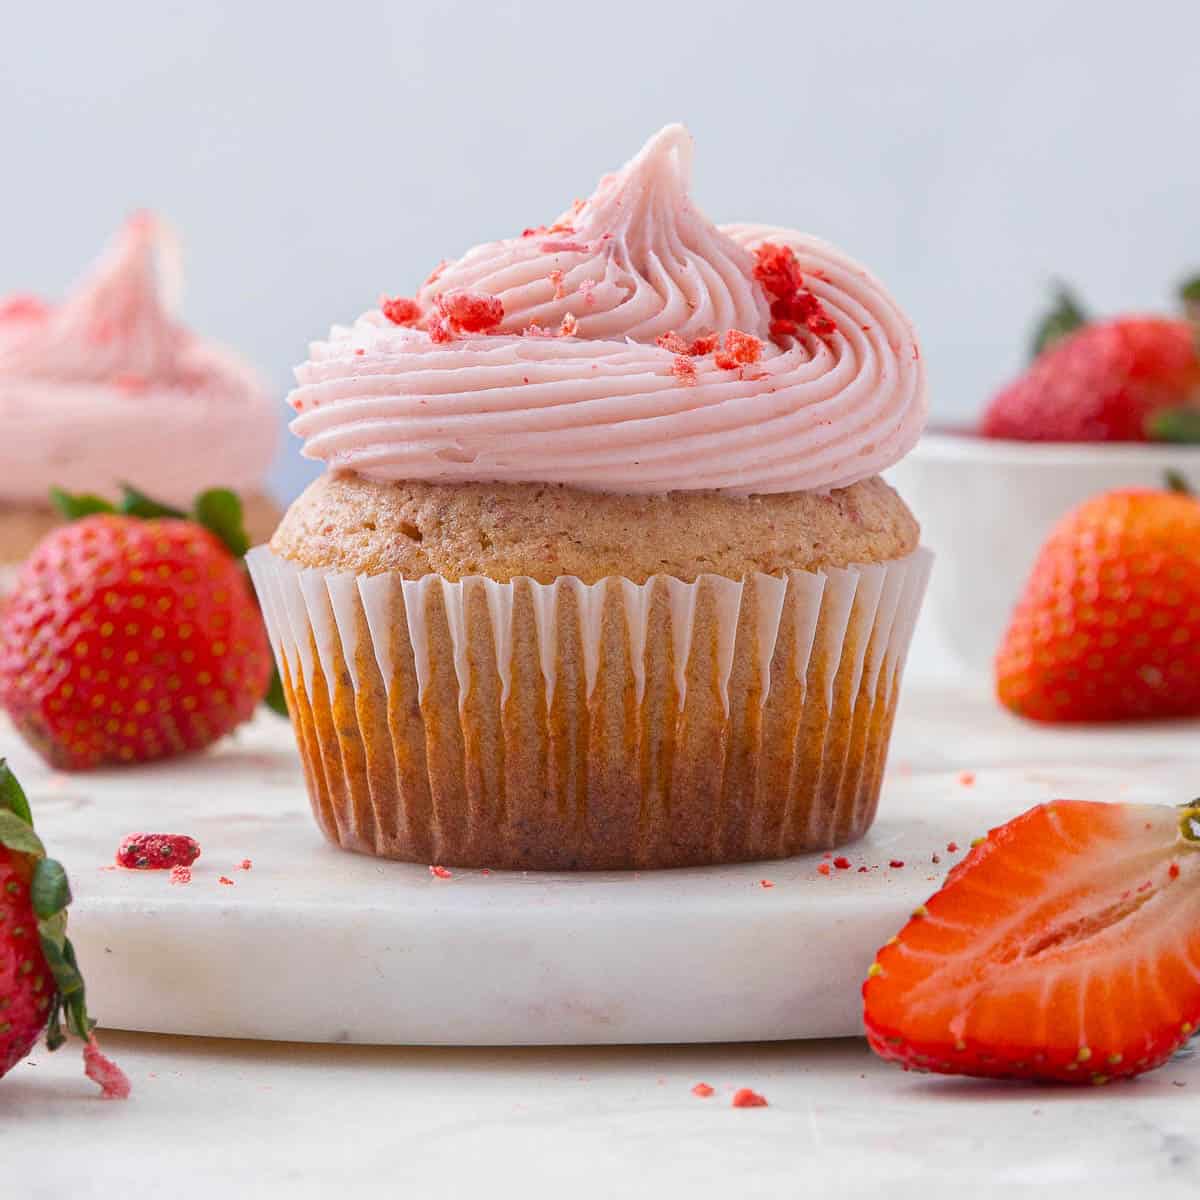 Close up of a strawberry cupcake with pink strawberry cream cheese frosting surrounded by fresh strawberries